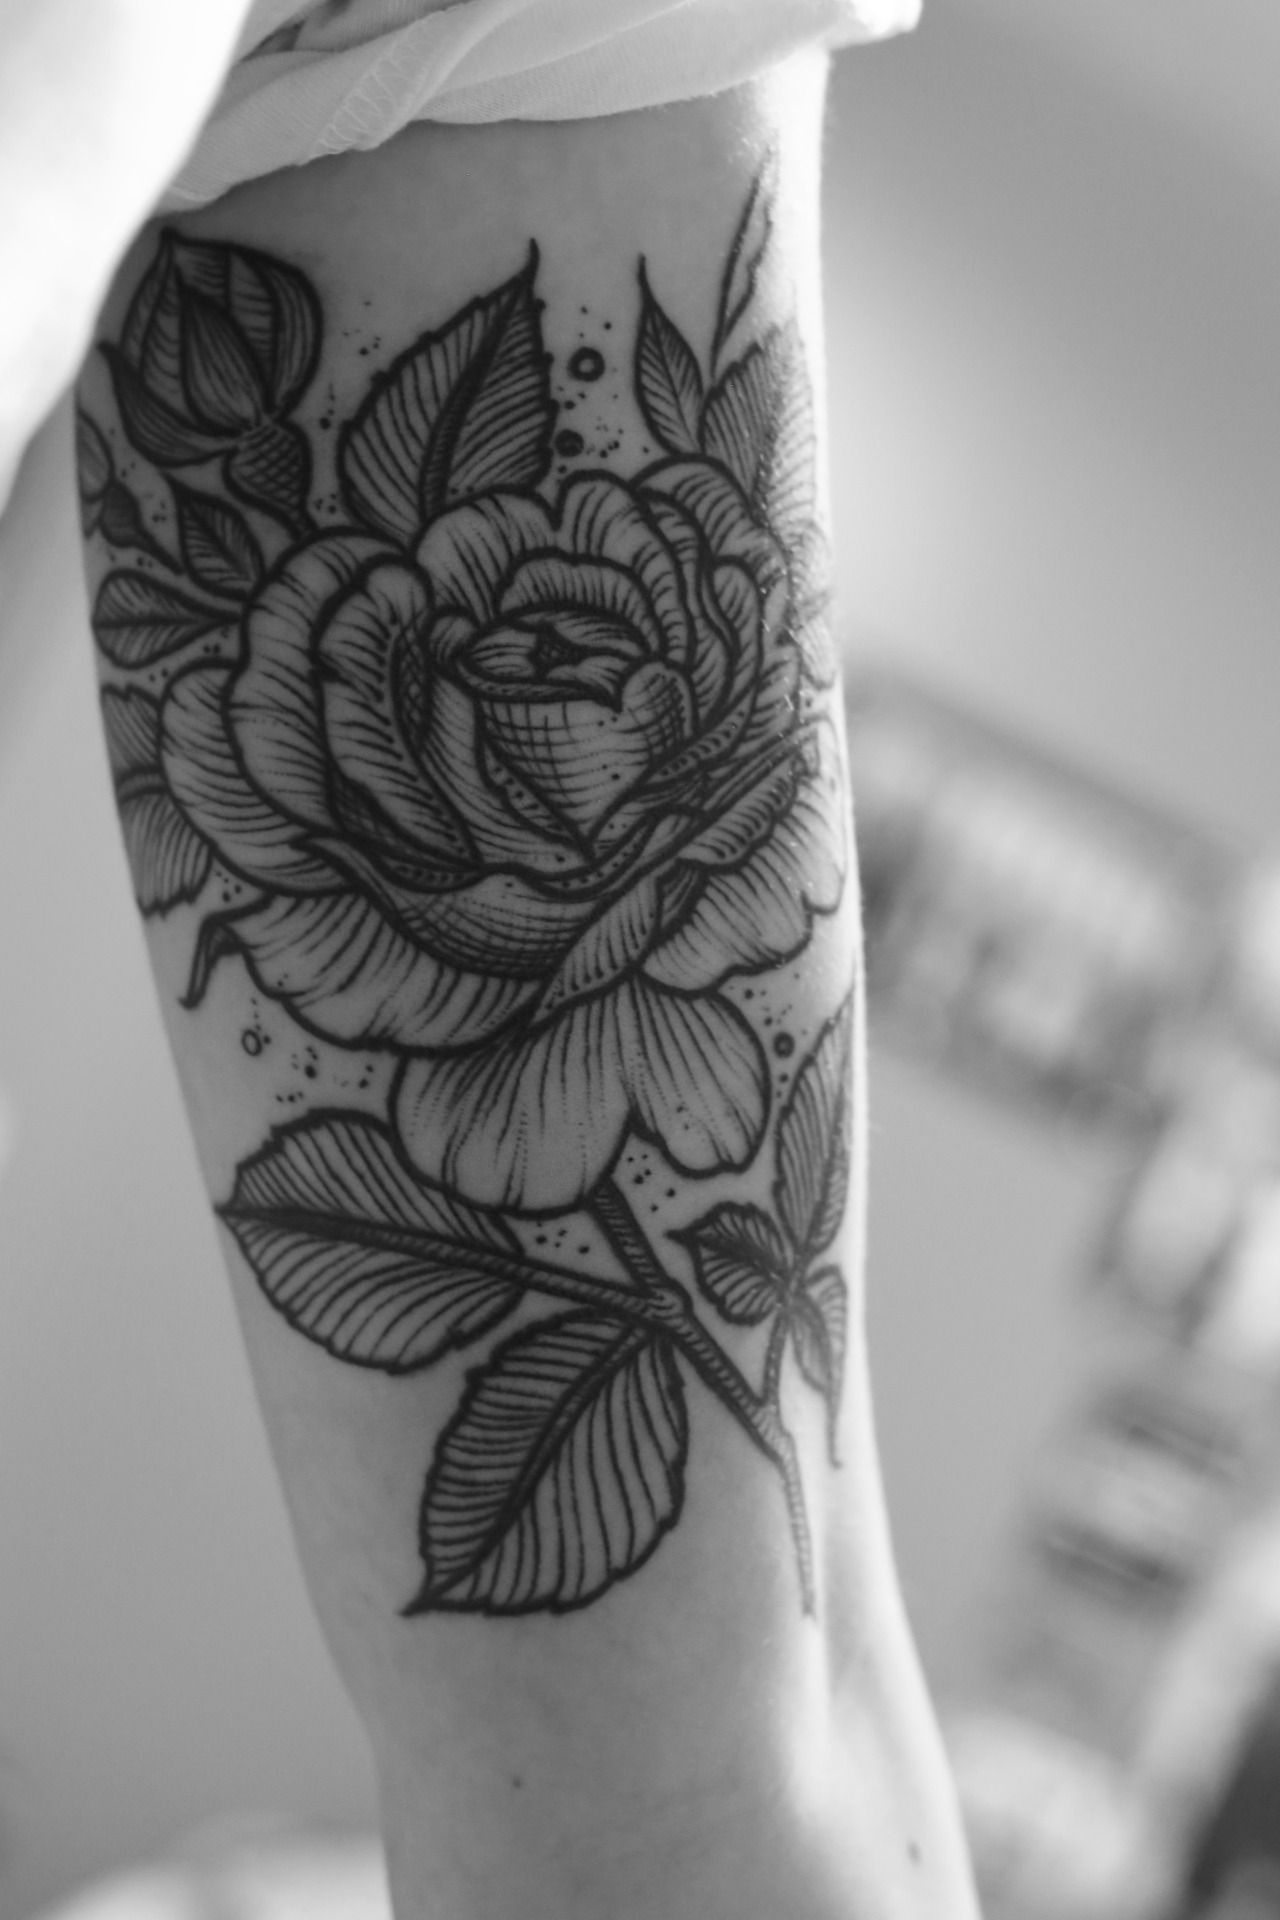 Beautiful Black And White Rose Tattoo On Arm Love It Time For A regarding dimensions 1280 X 1920